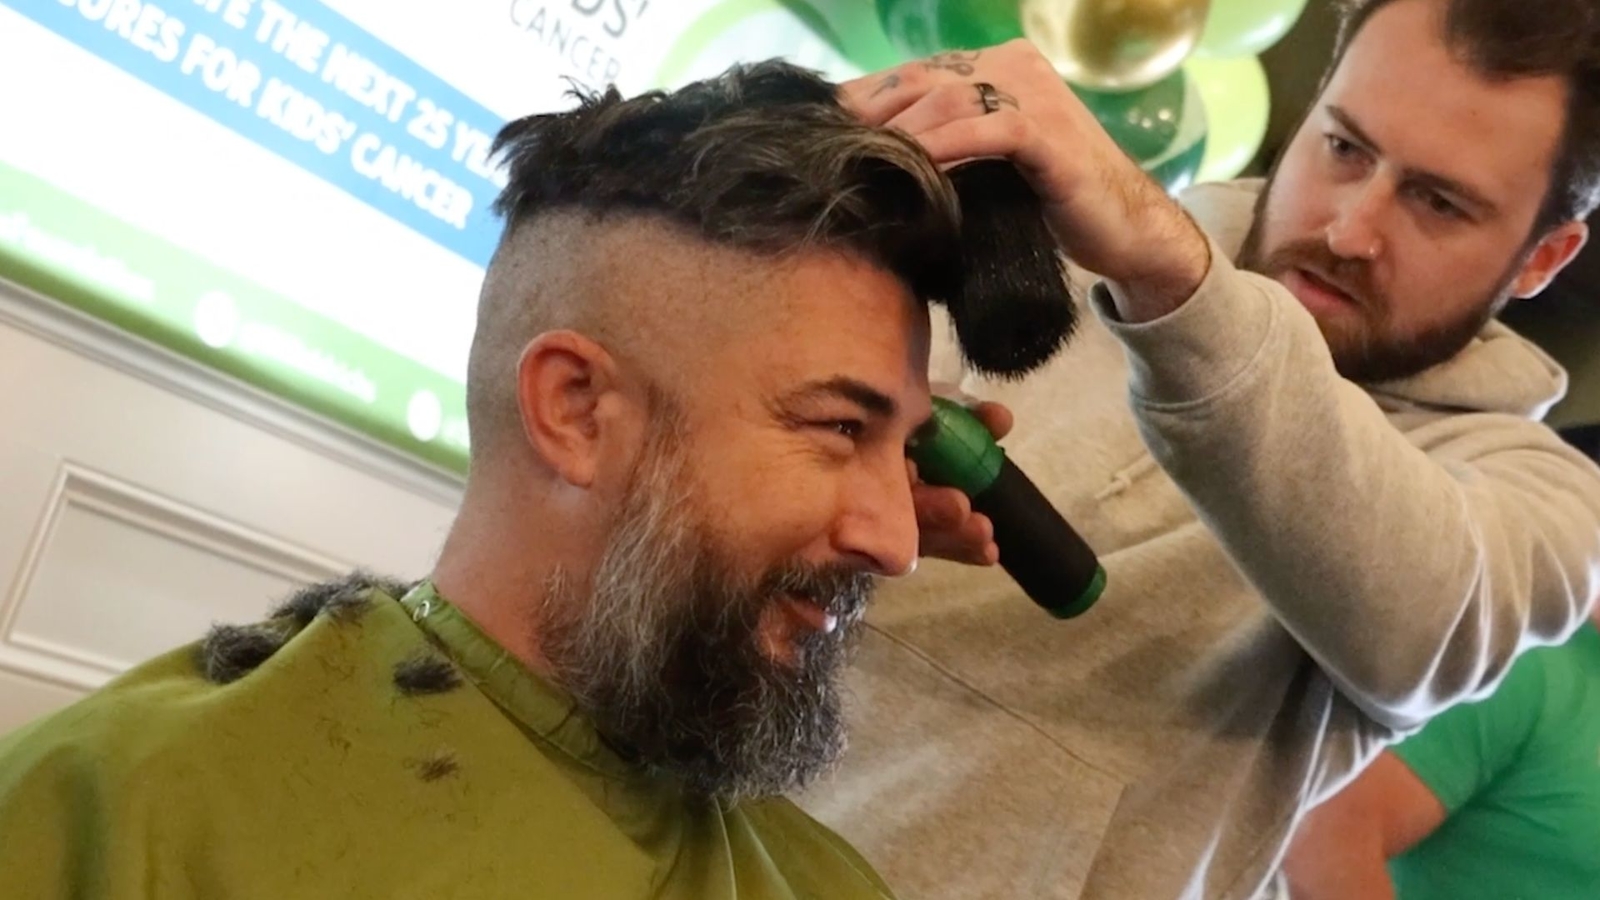 This pub in Lafayette Hill helped shave away at childhood cancer with their 10th annual head-shaving event [Video]